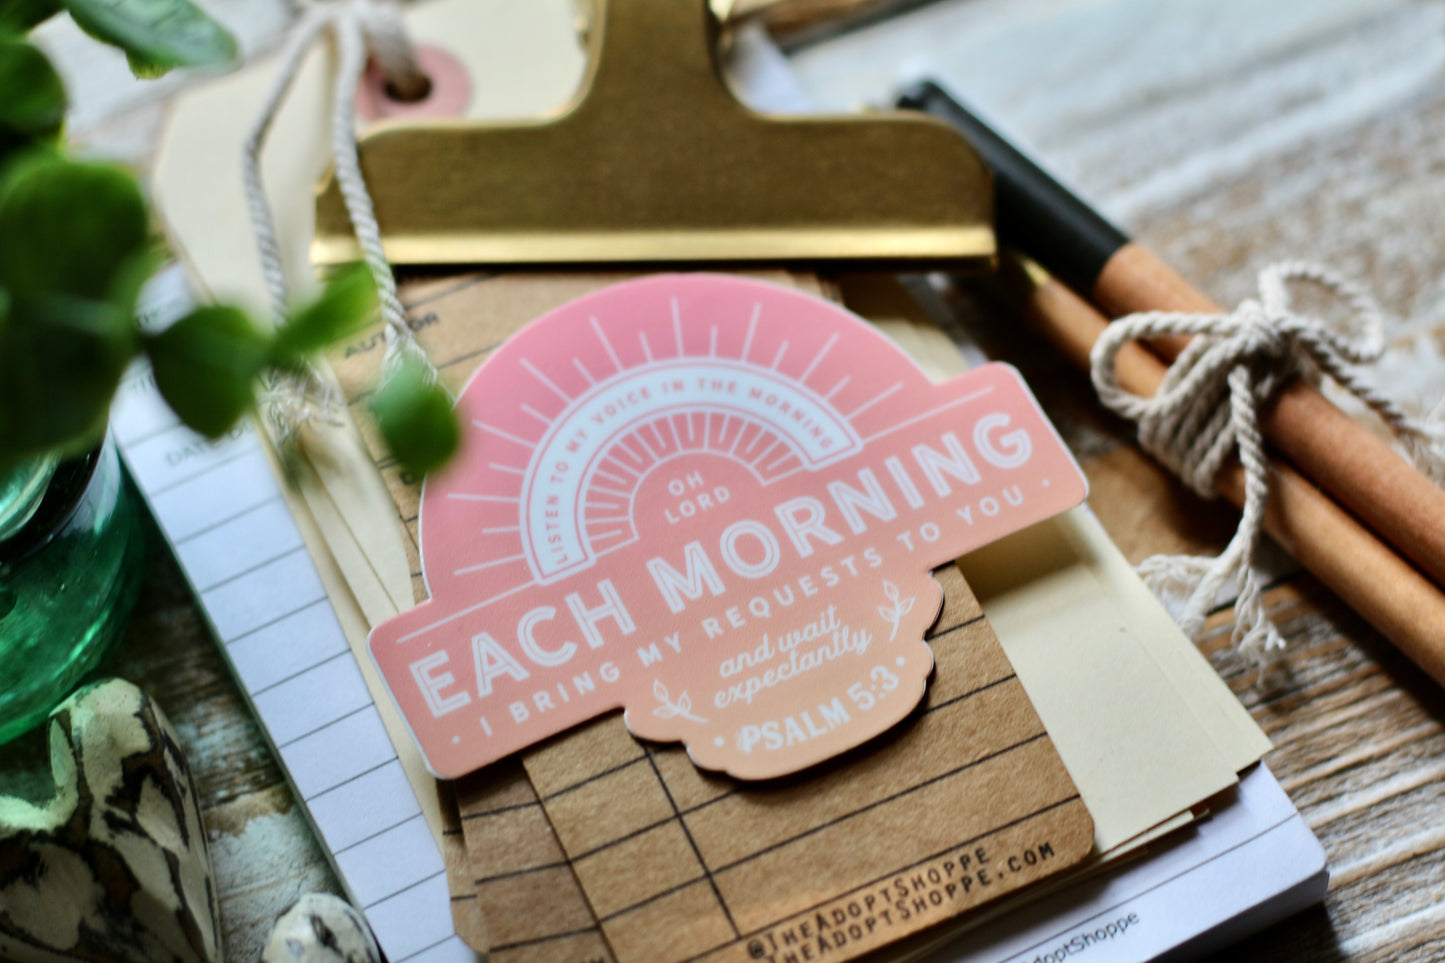 morning requests - wait expectantly - pink peach (Psalm 5:3) waterproof vinyl sticker decal